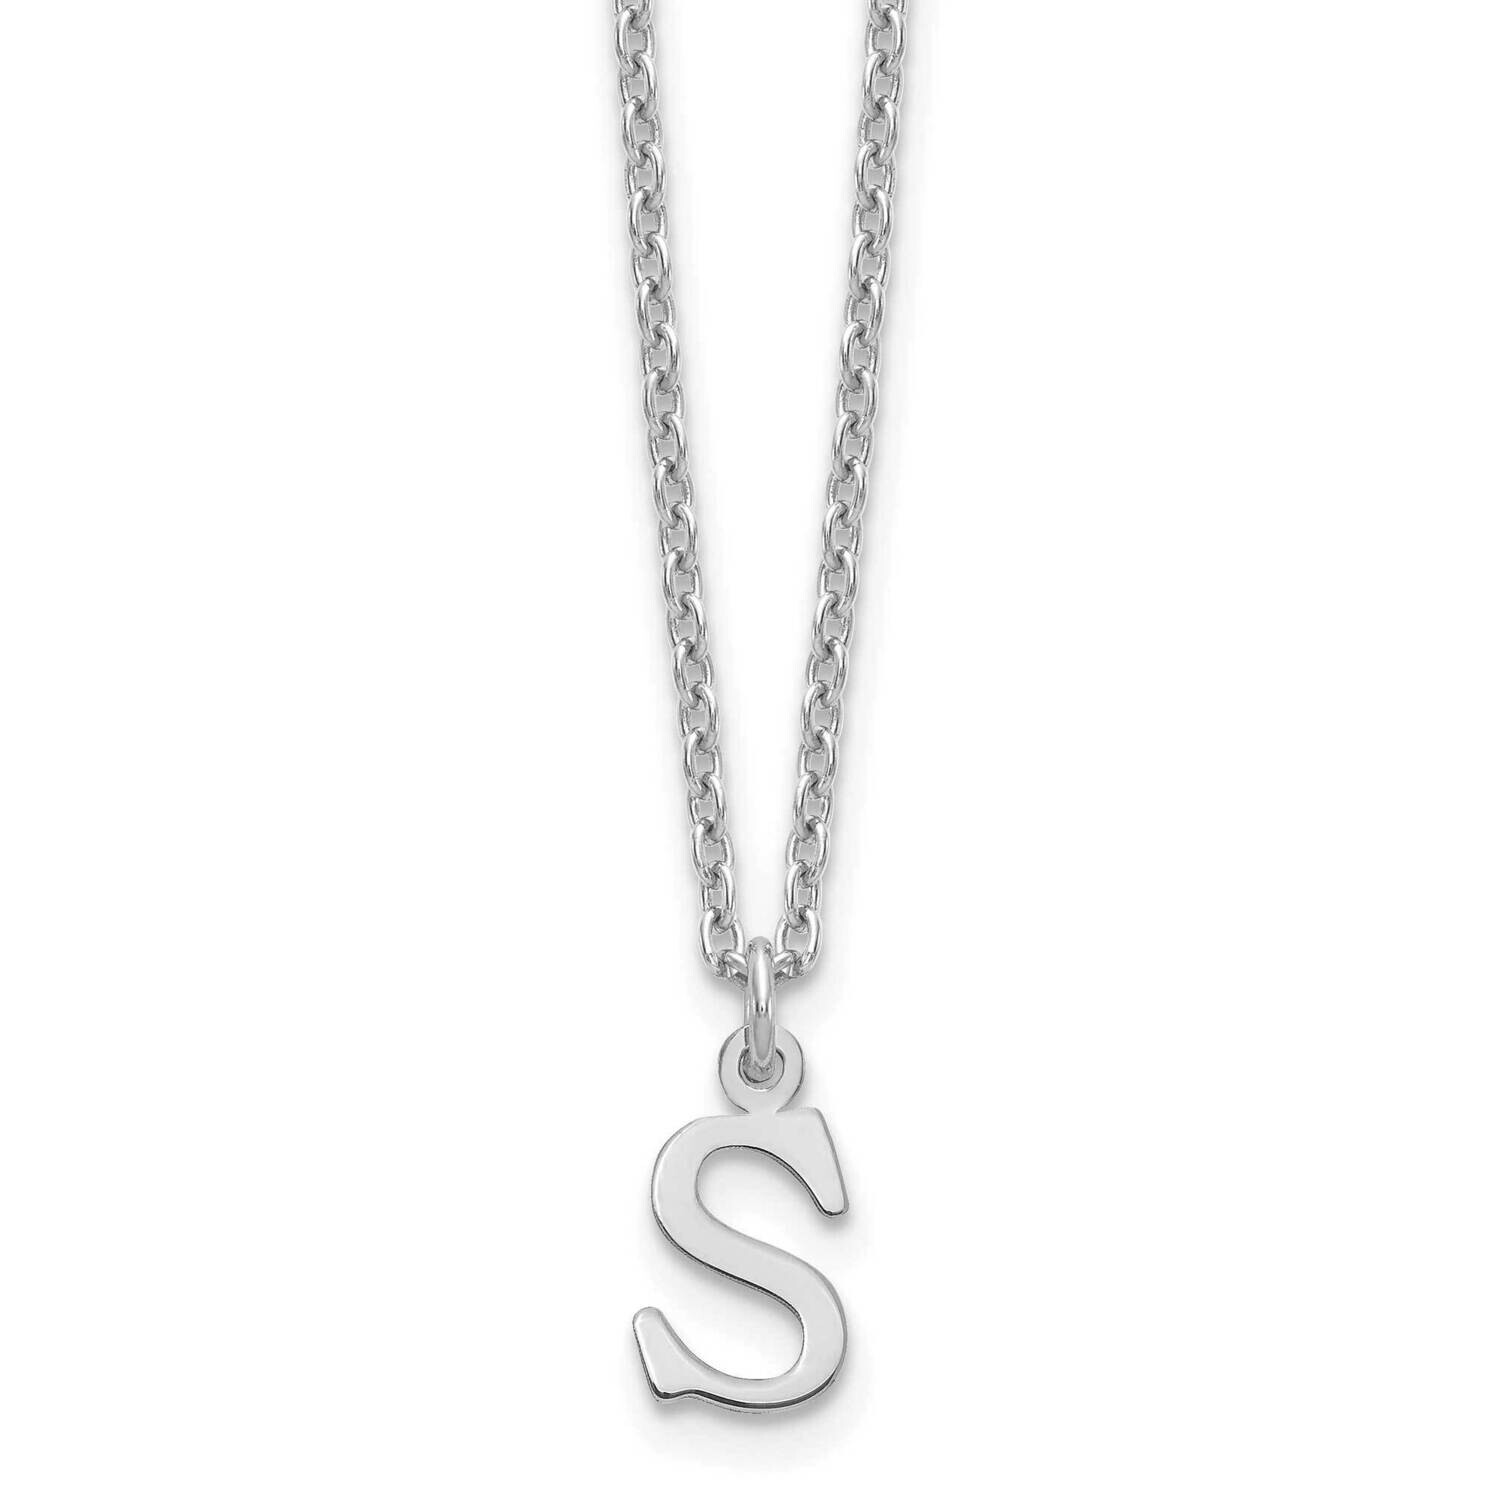 Cutout Letter S Initial Necklace Sterling Silver Rhodium-Plated XNA727SS/S